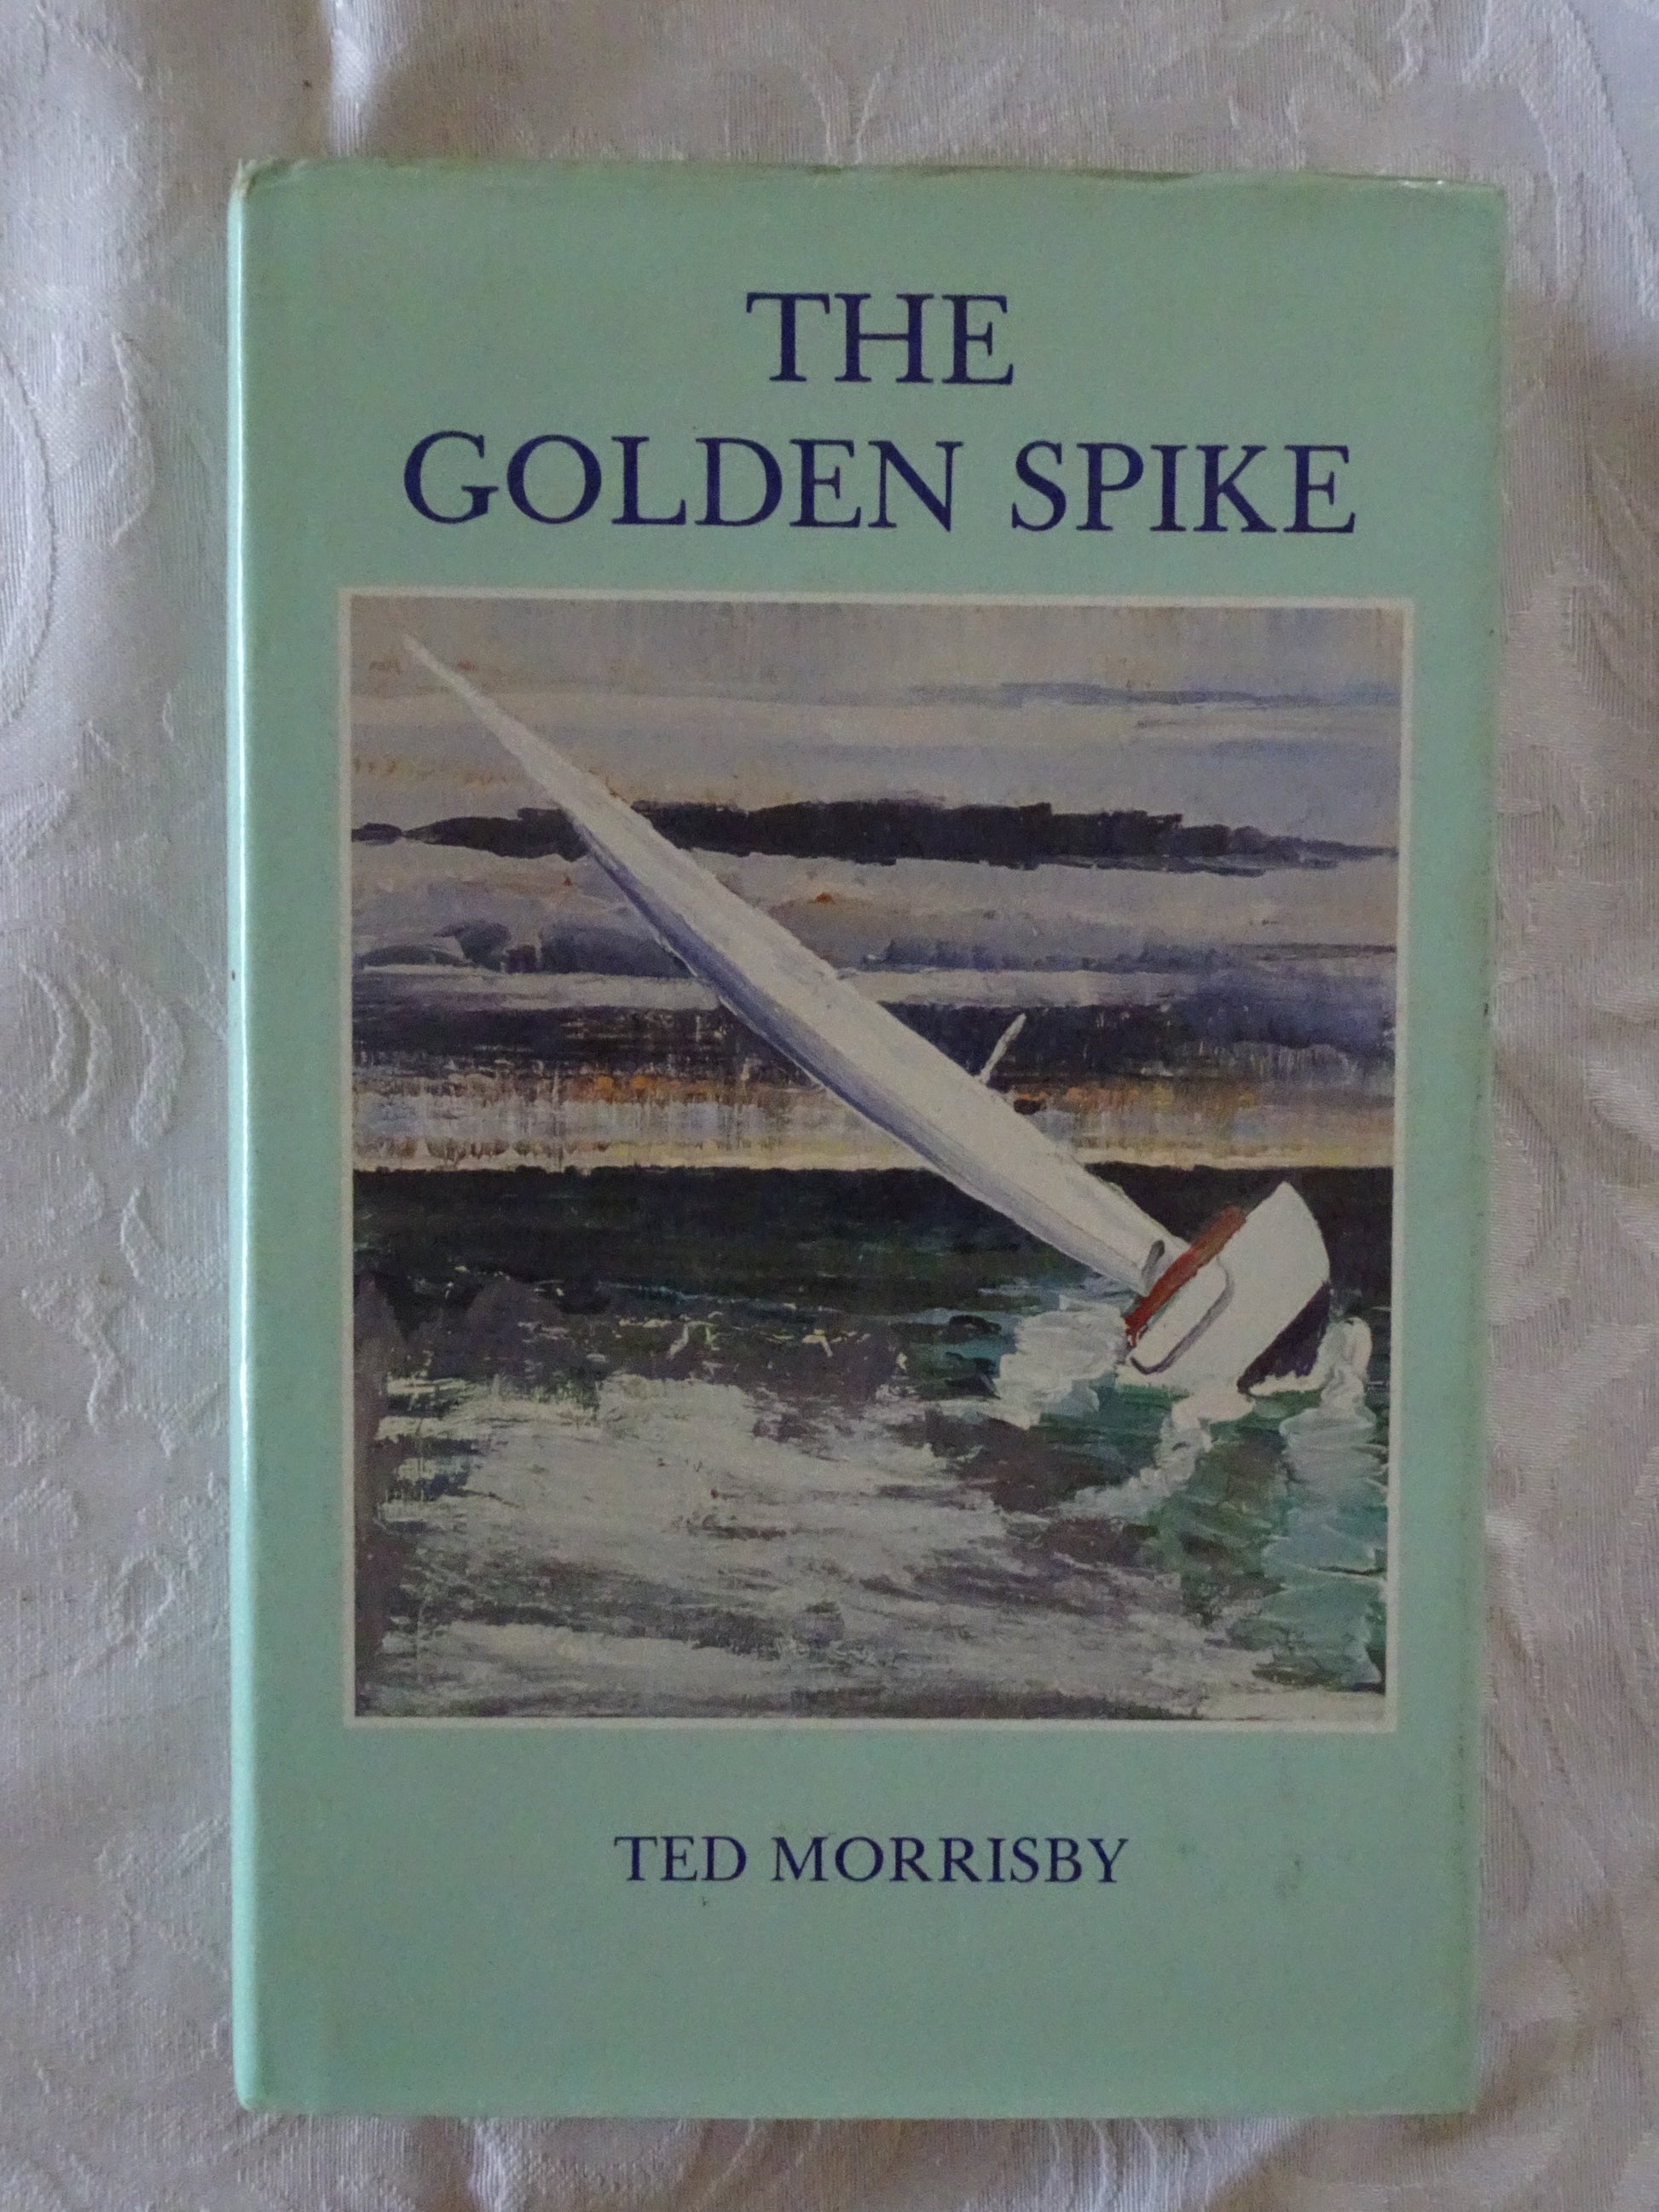 The Golden Spike  by Ted Morrisby